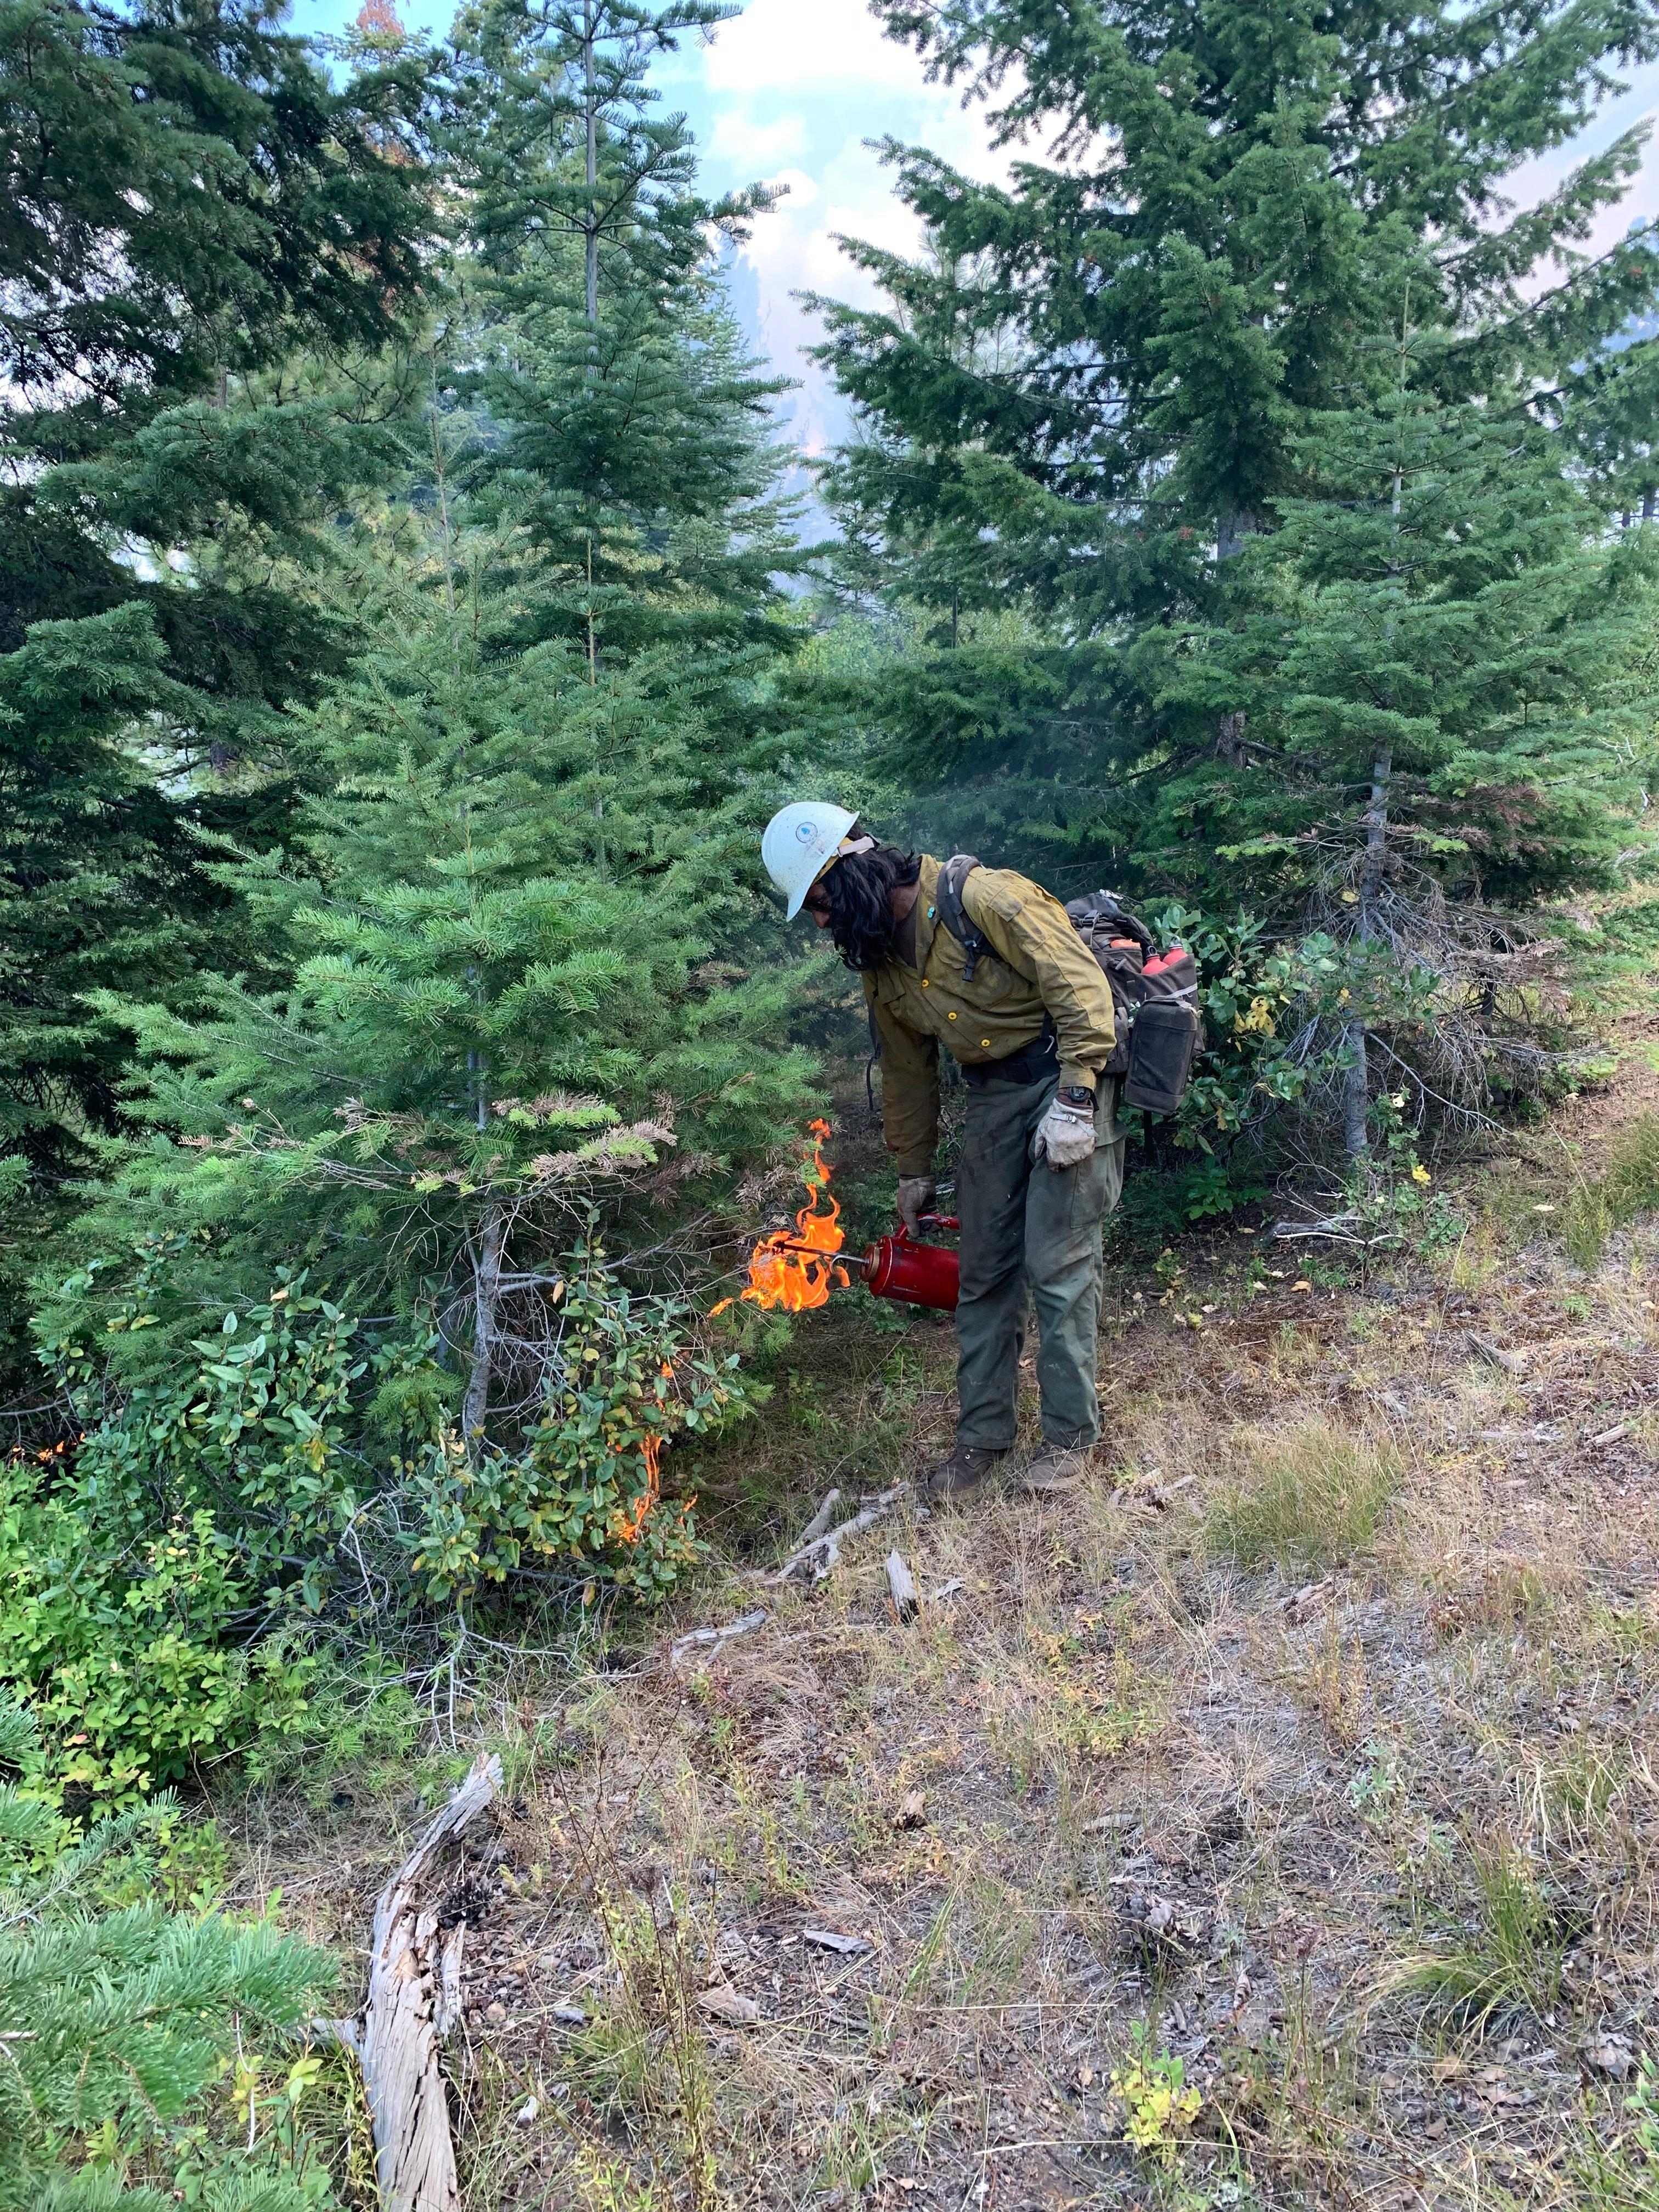 A firefighter is using a drip torch to light a fire on the ground in a vegetated forest. 